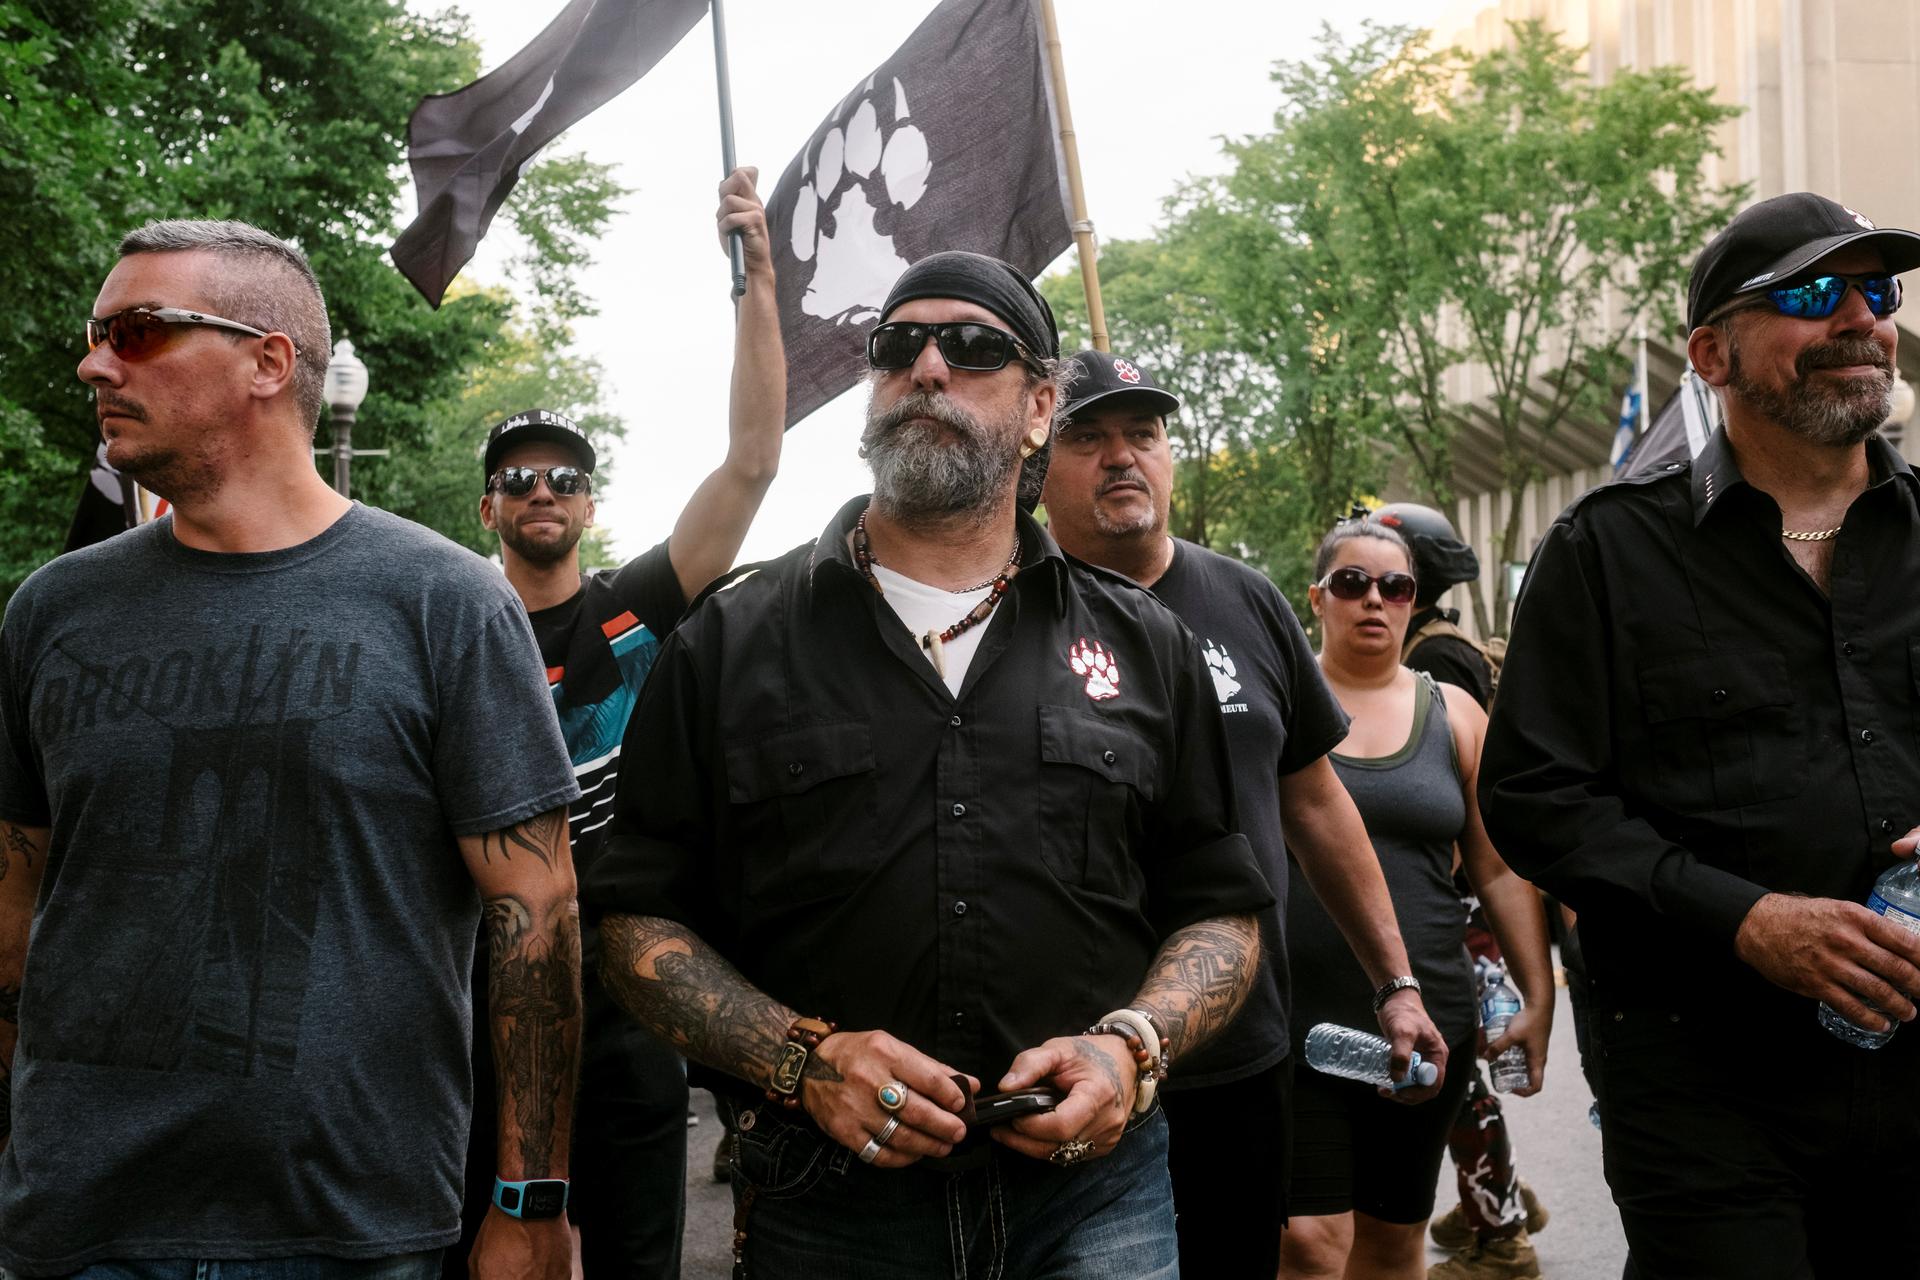 Patrick Beaudry, founder and leader of Quebec group La Meute, marches during a protest to demand stronger border controls in Quebec City.